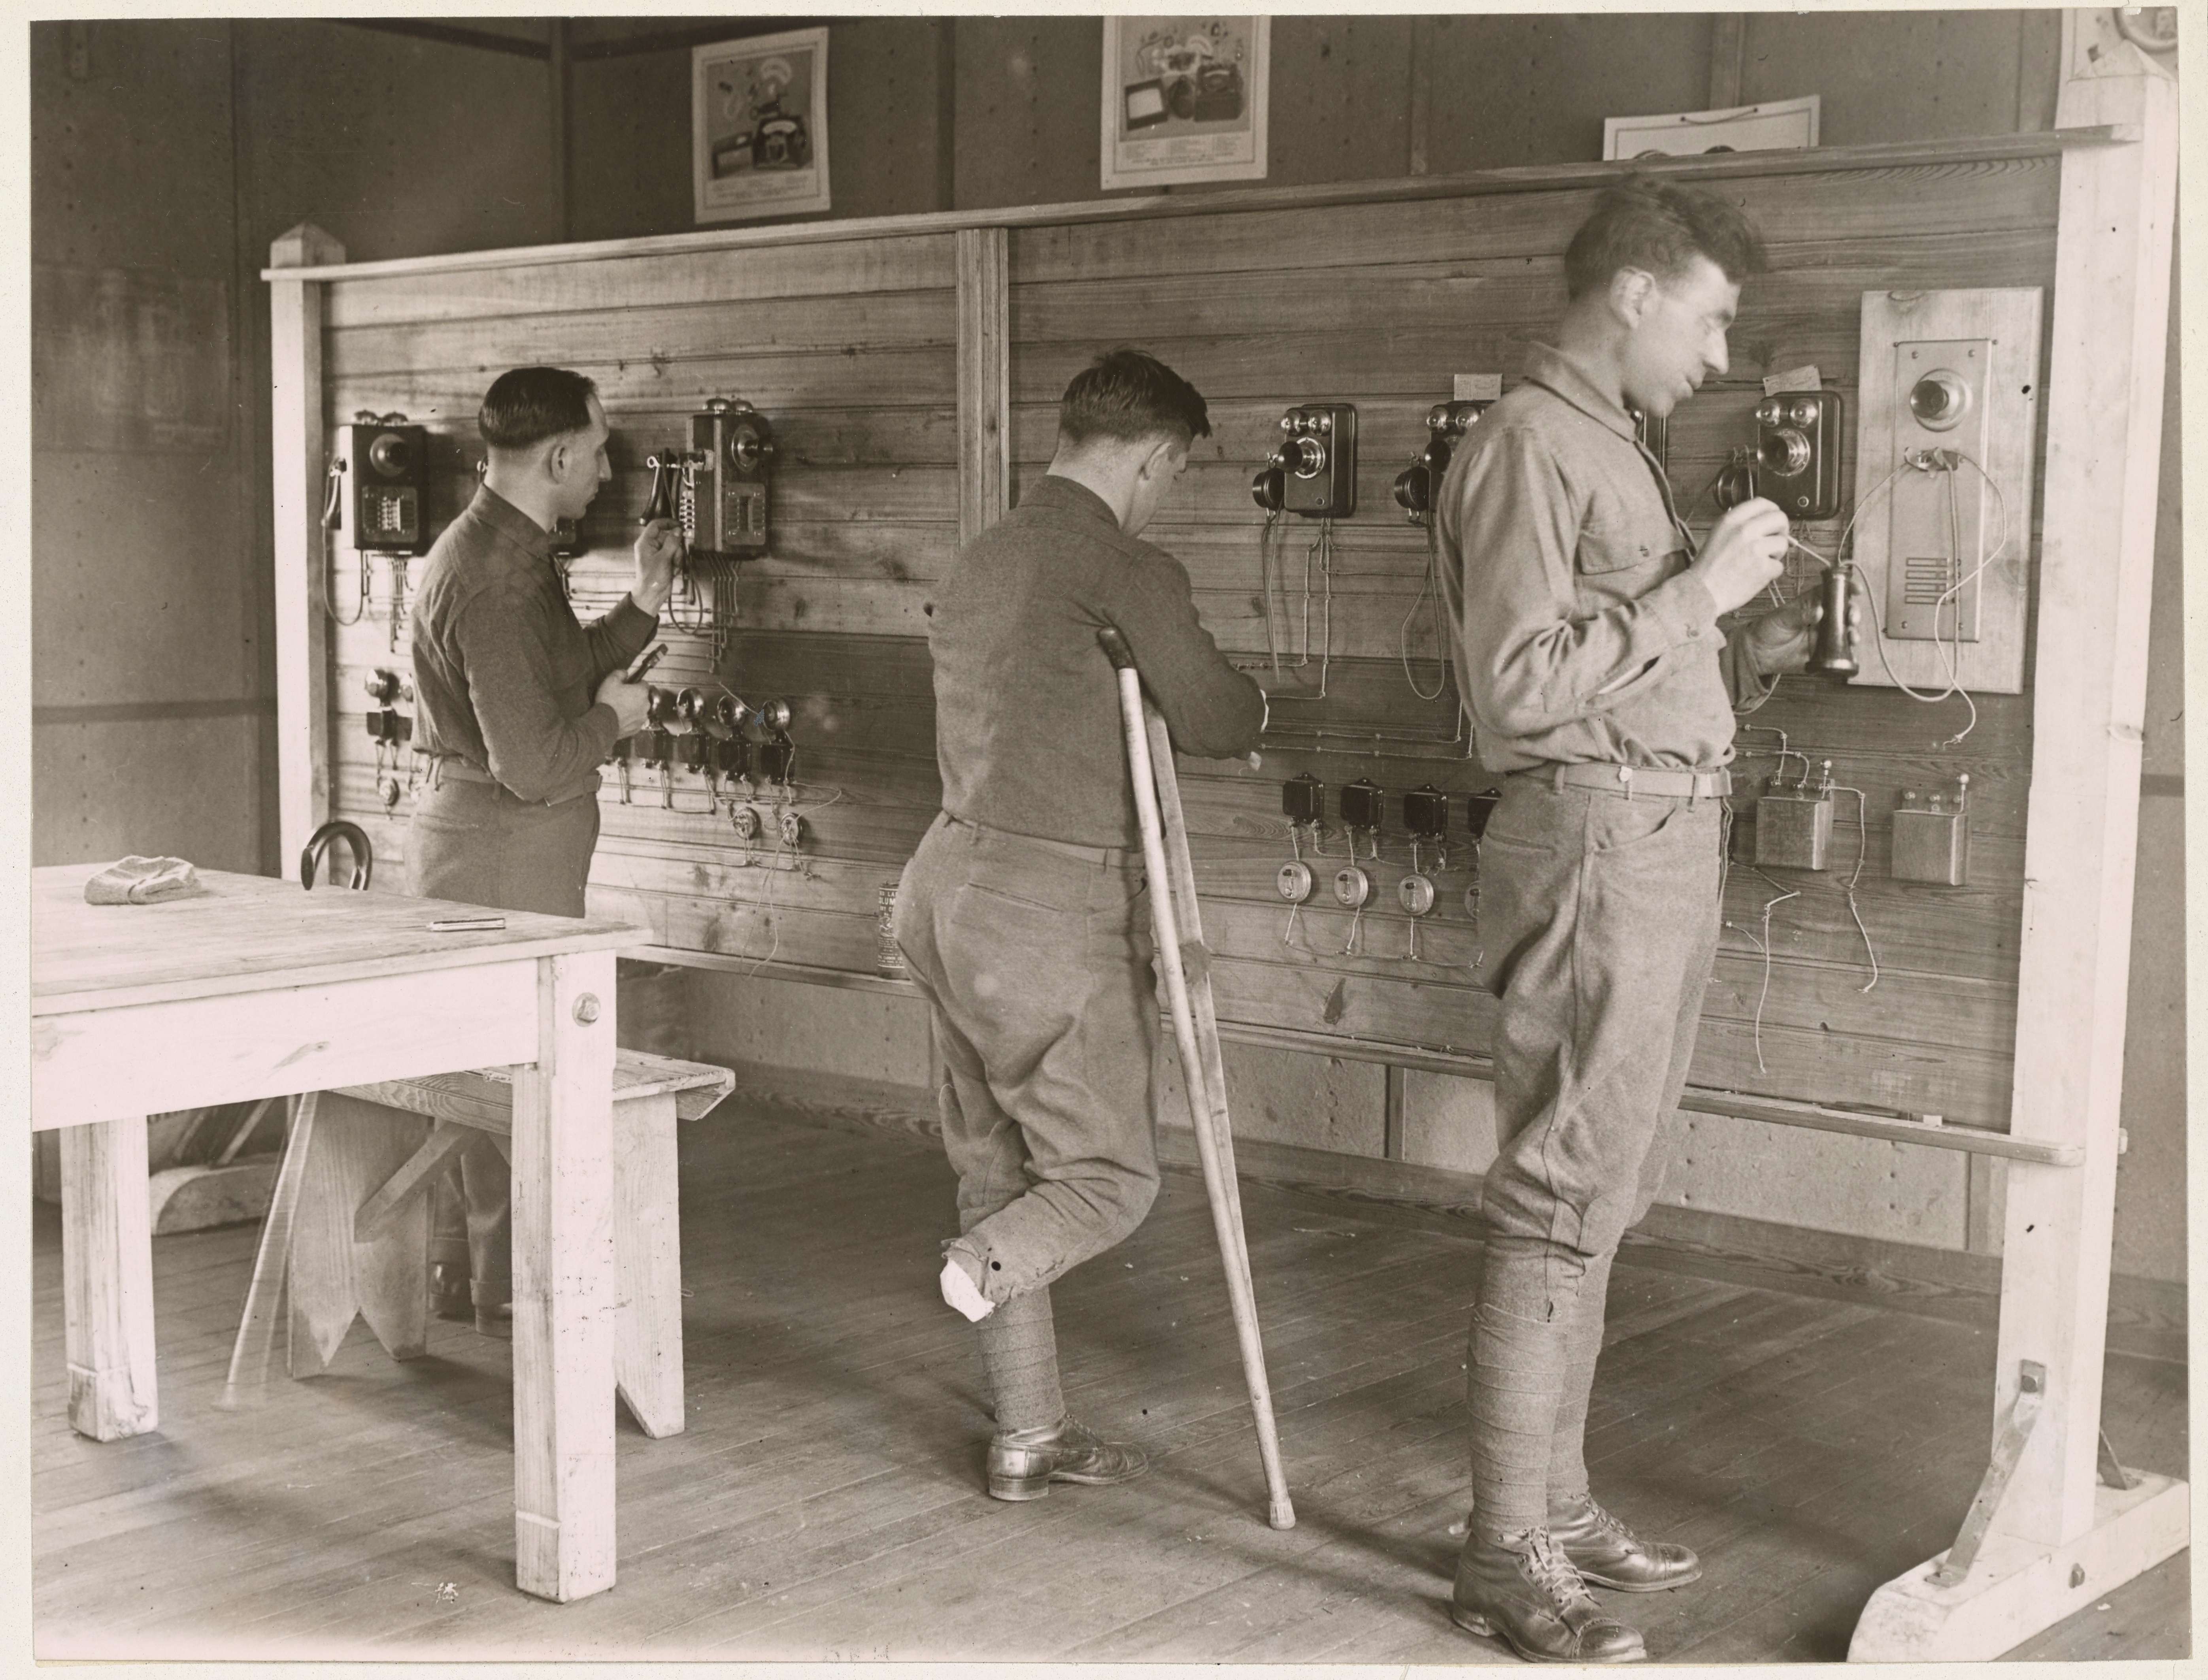 Disabled soldiers repairing telephones at General Hospital Number 3, Colonia, New Jersey.